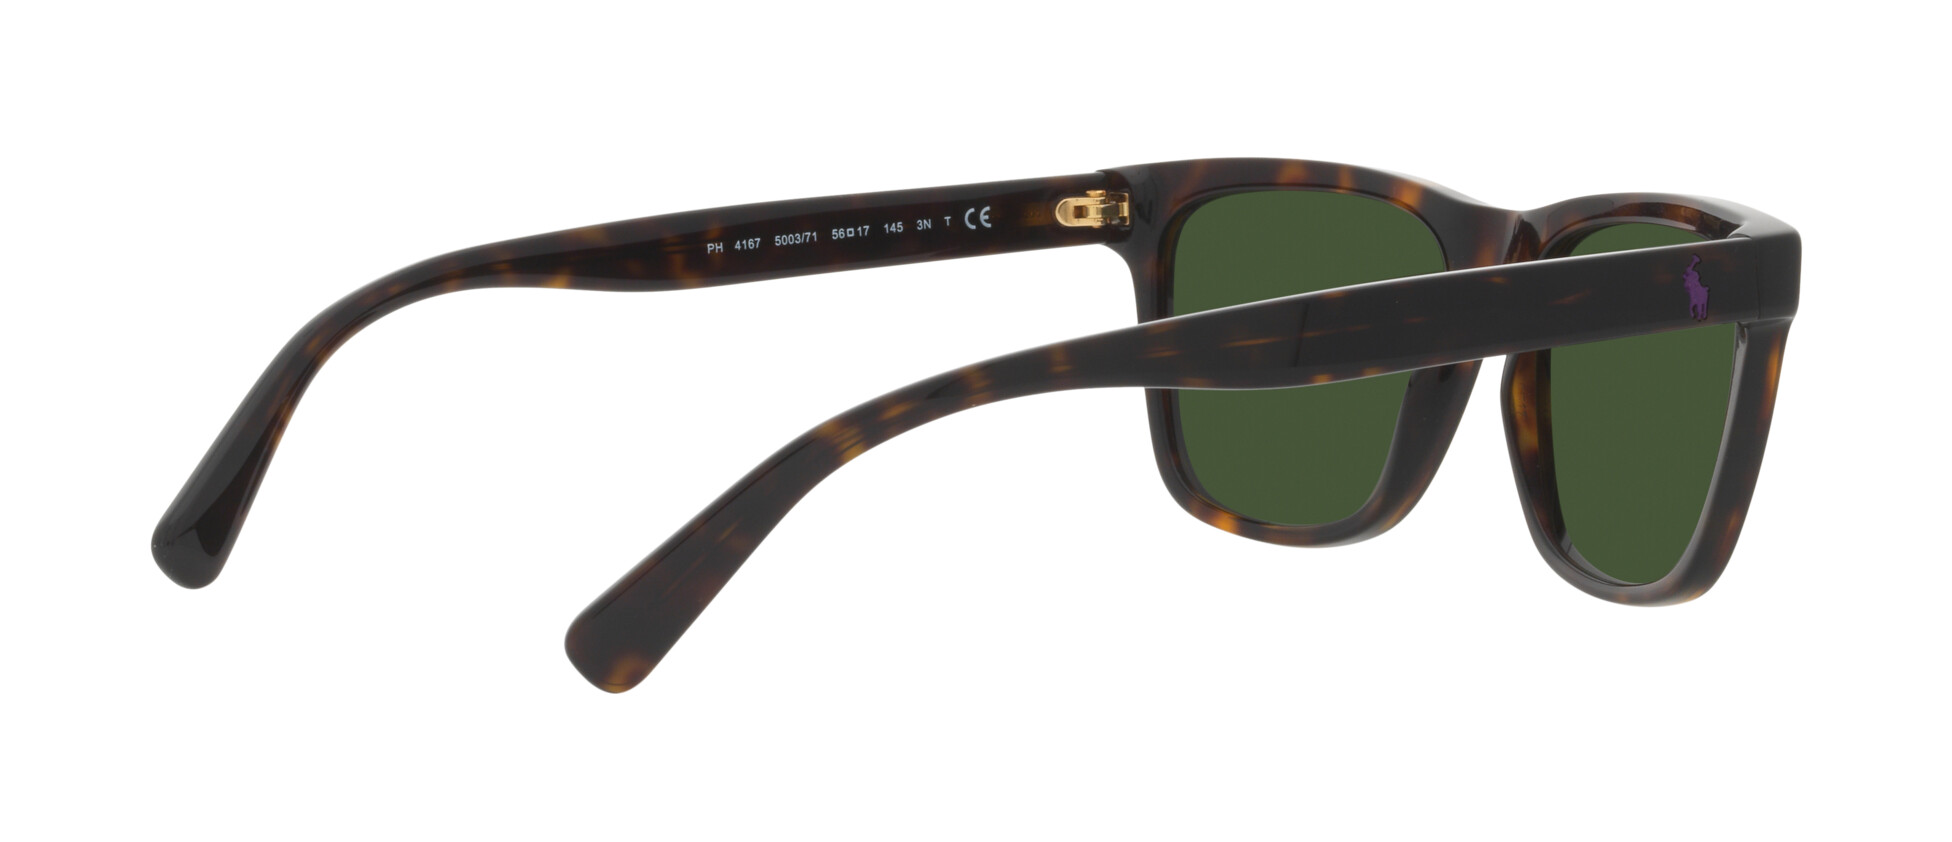 [products.image.promotional02] Polo Ralph Lauren 0PH4167 500371 Sonnenbrille